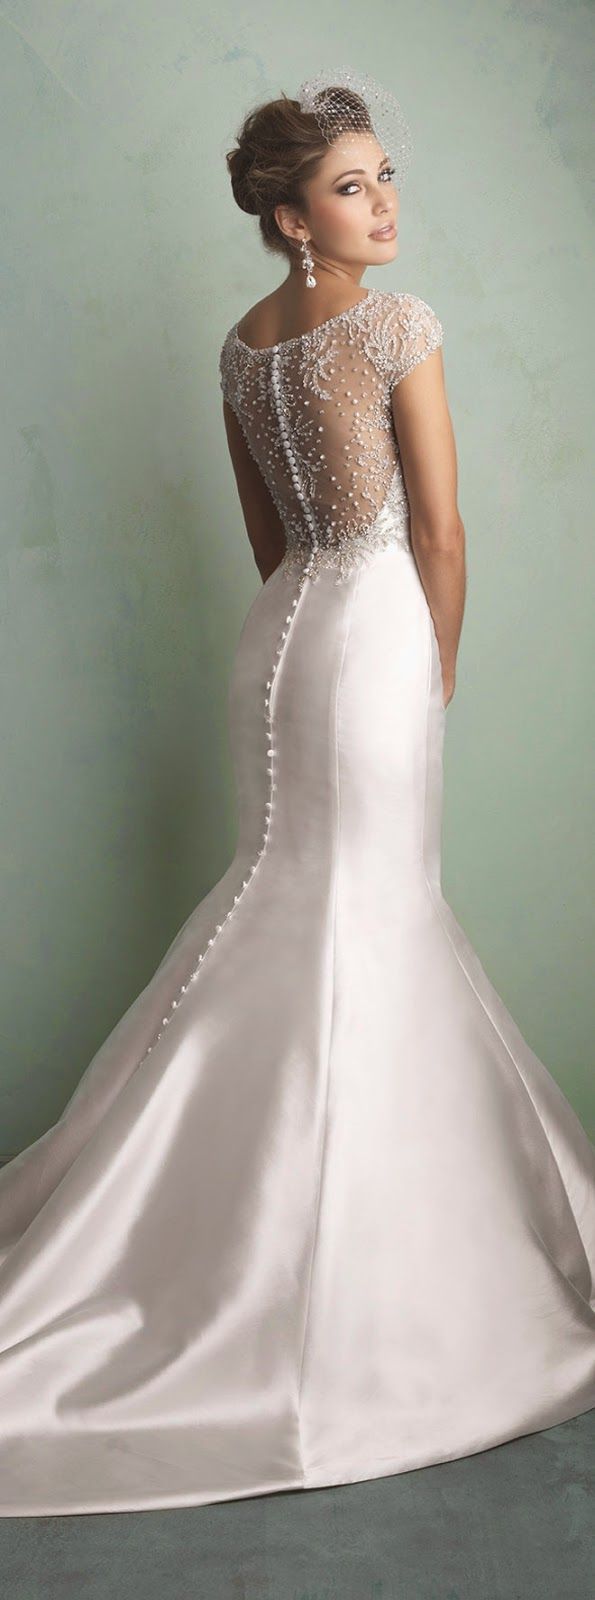 Wedding - Buttons Down The Back: Sophisticated Wedding Gowns